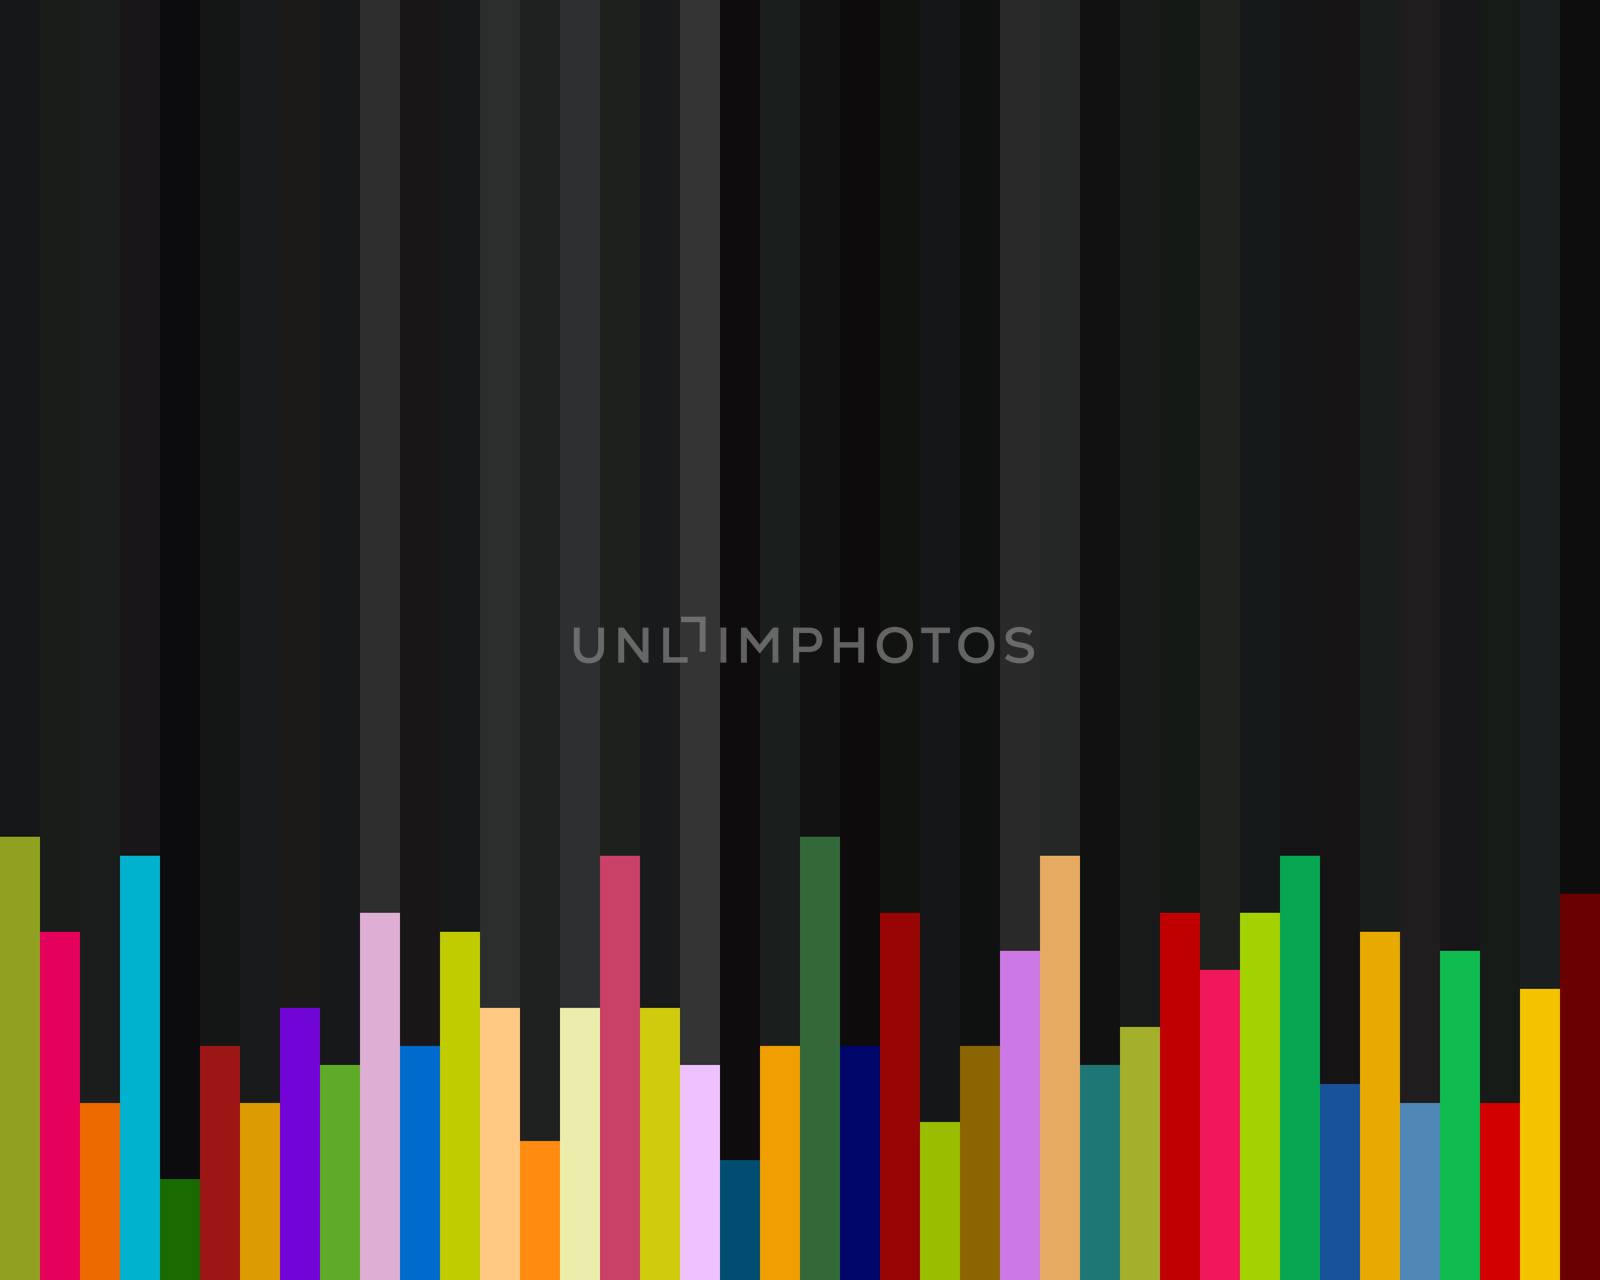 Abstract colorful infographics bars with black background for reporting purpose